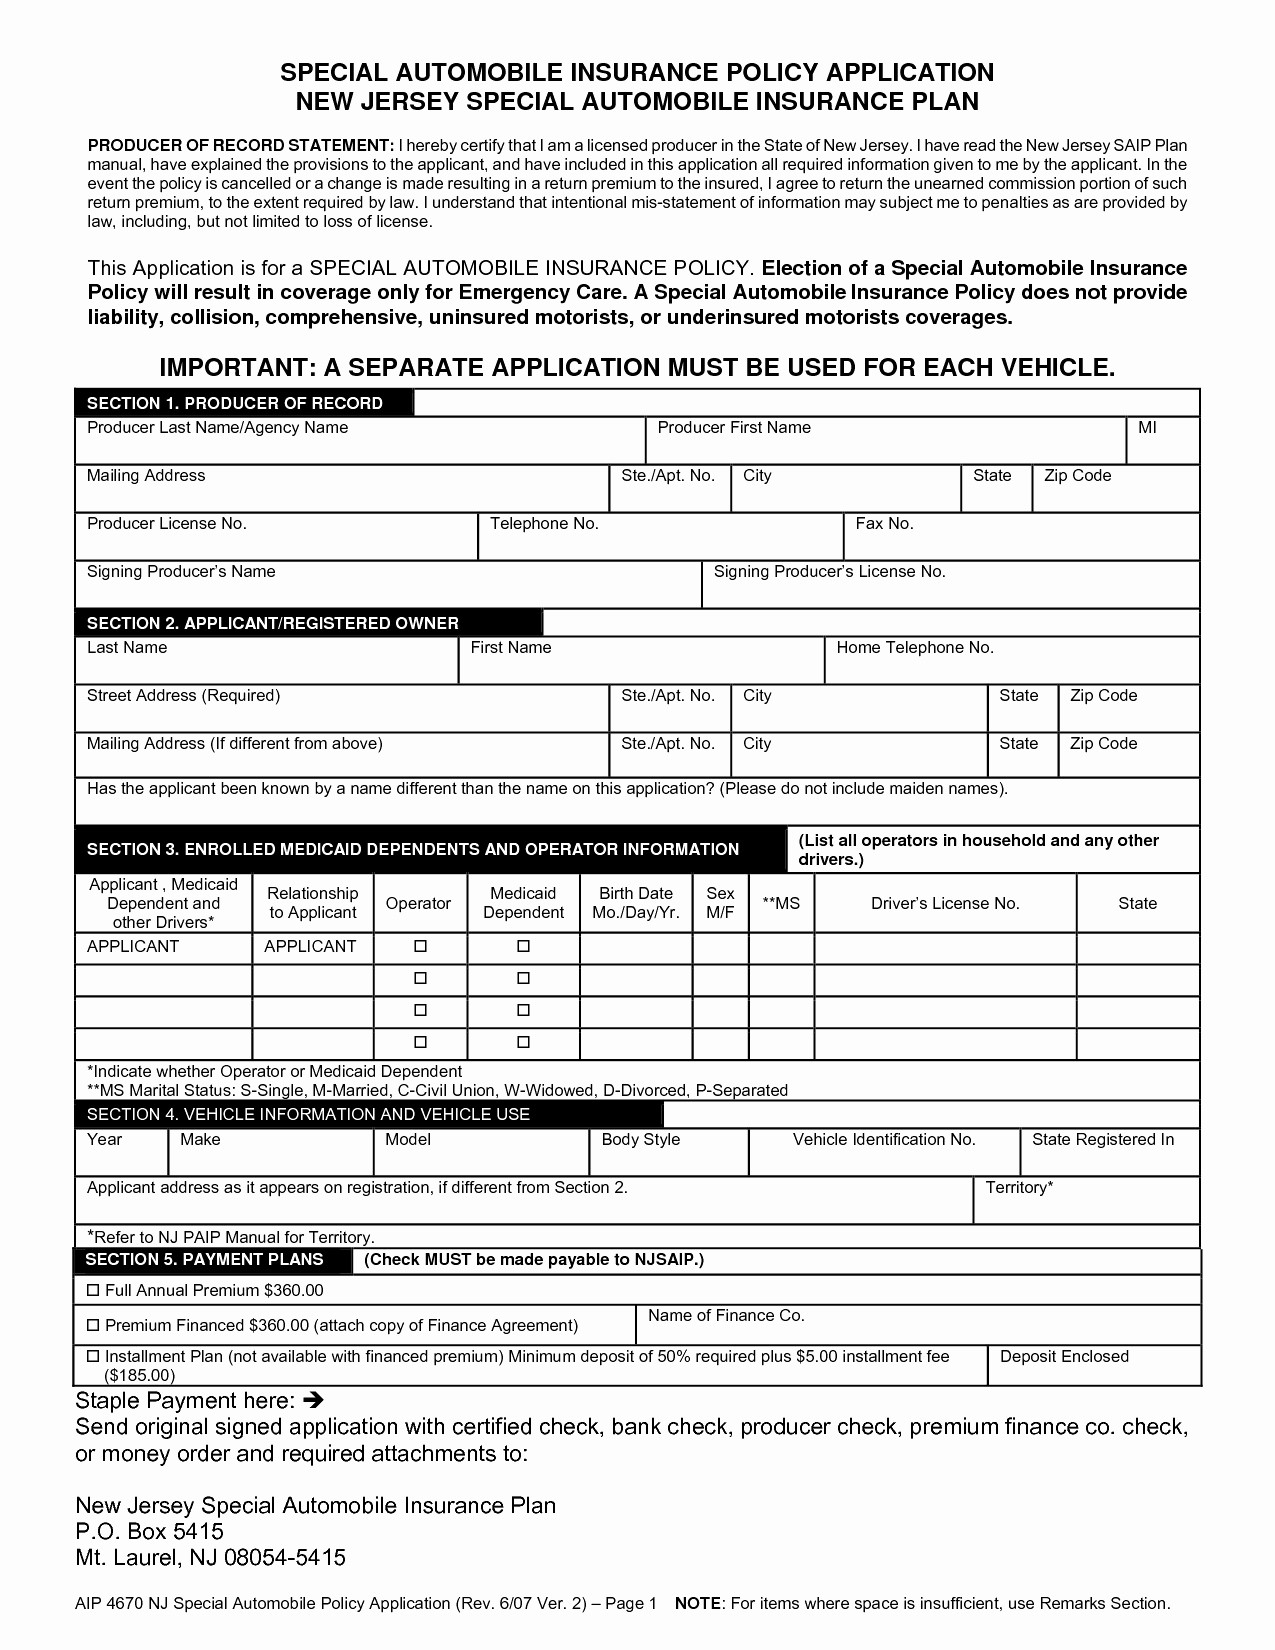 50 Awesome Auto Insurance Questionnaire Template DOCUMENTS IDEAS Document